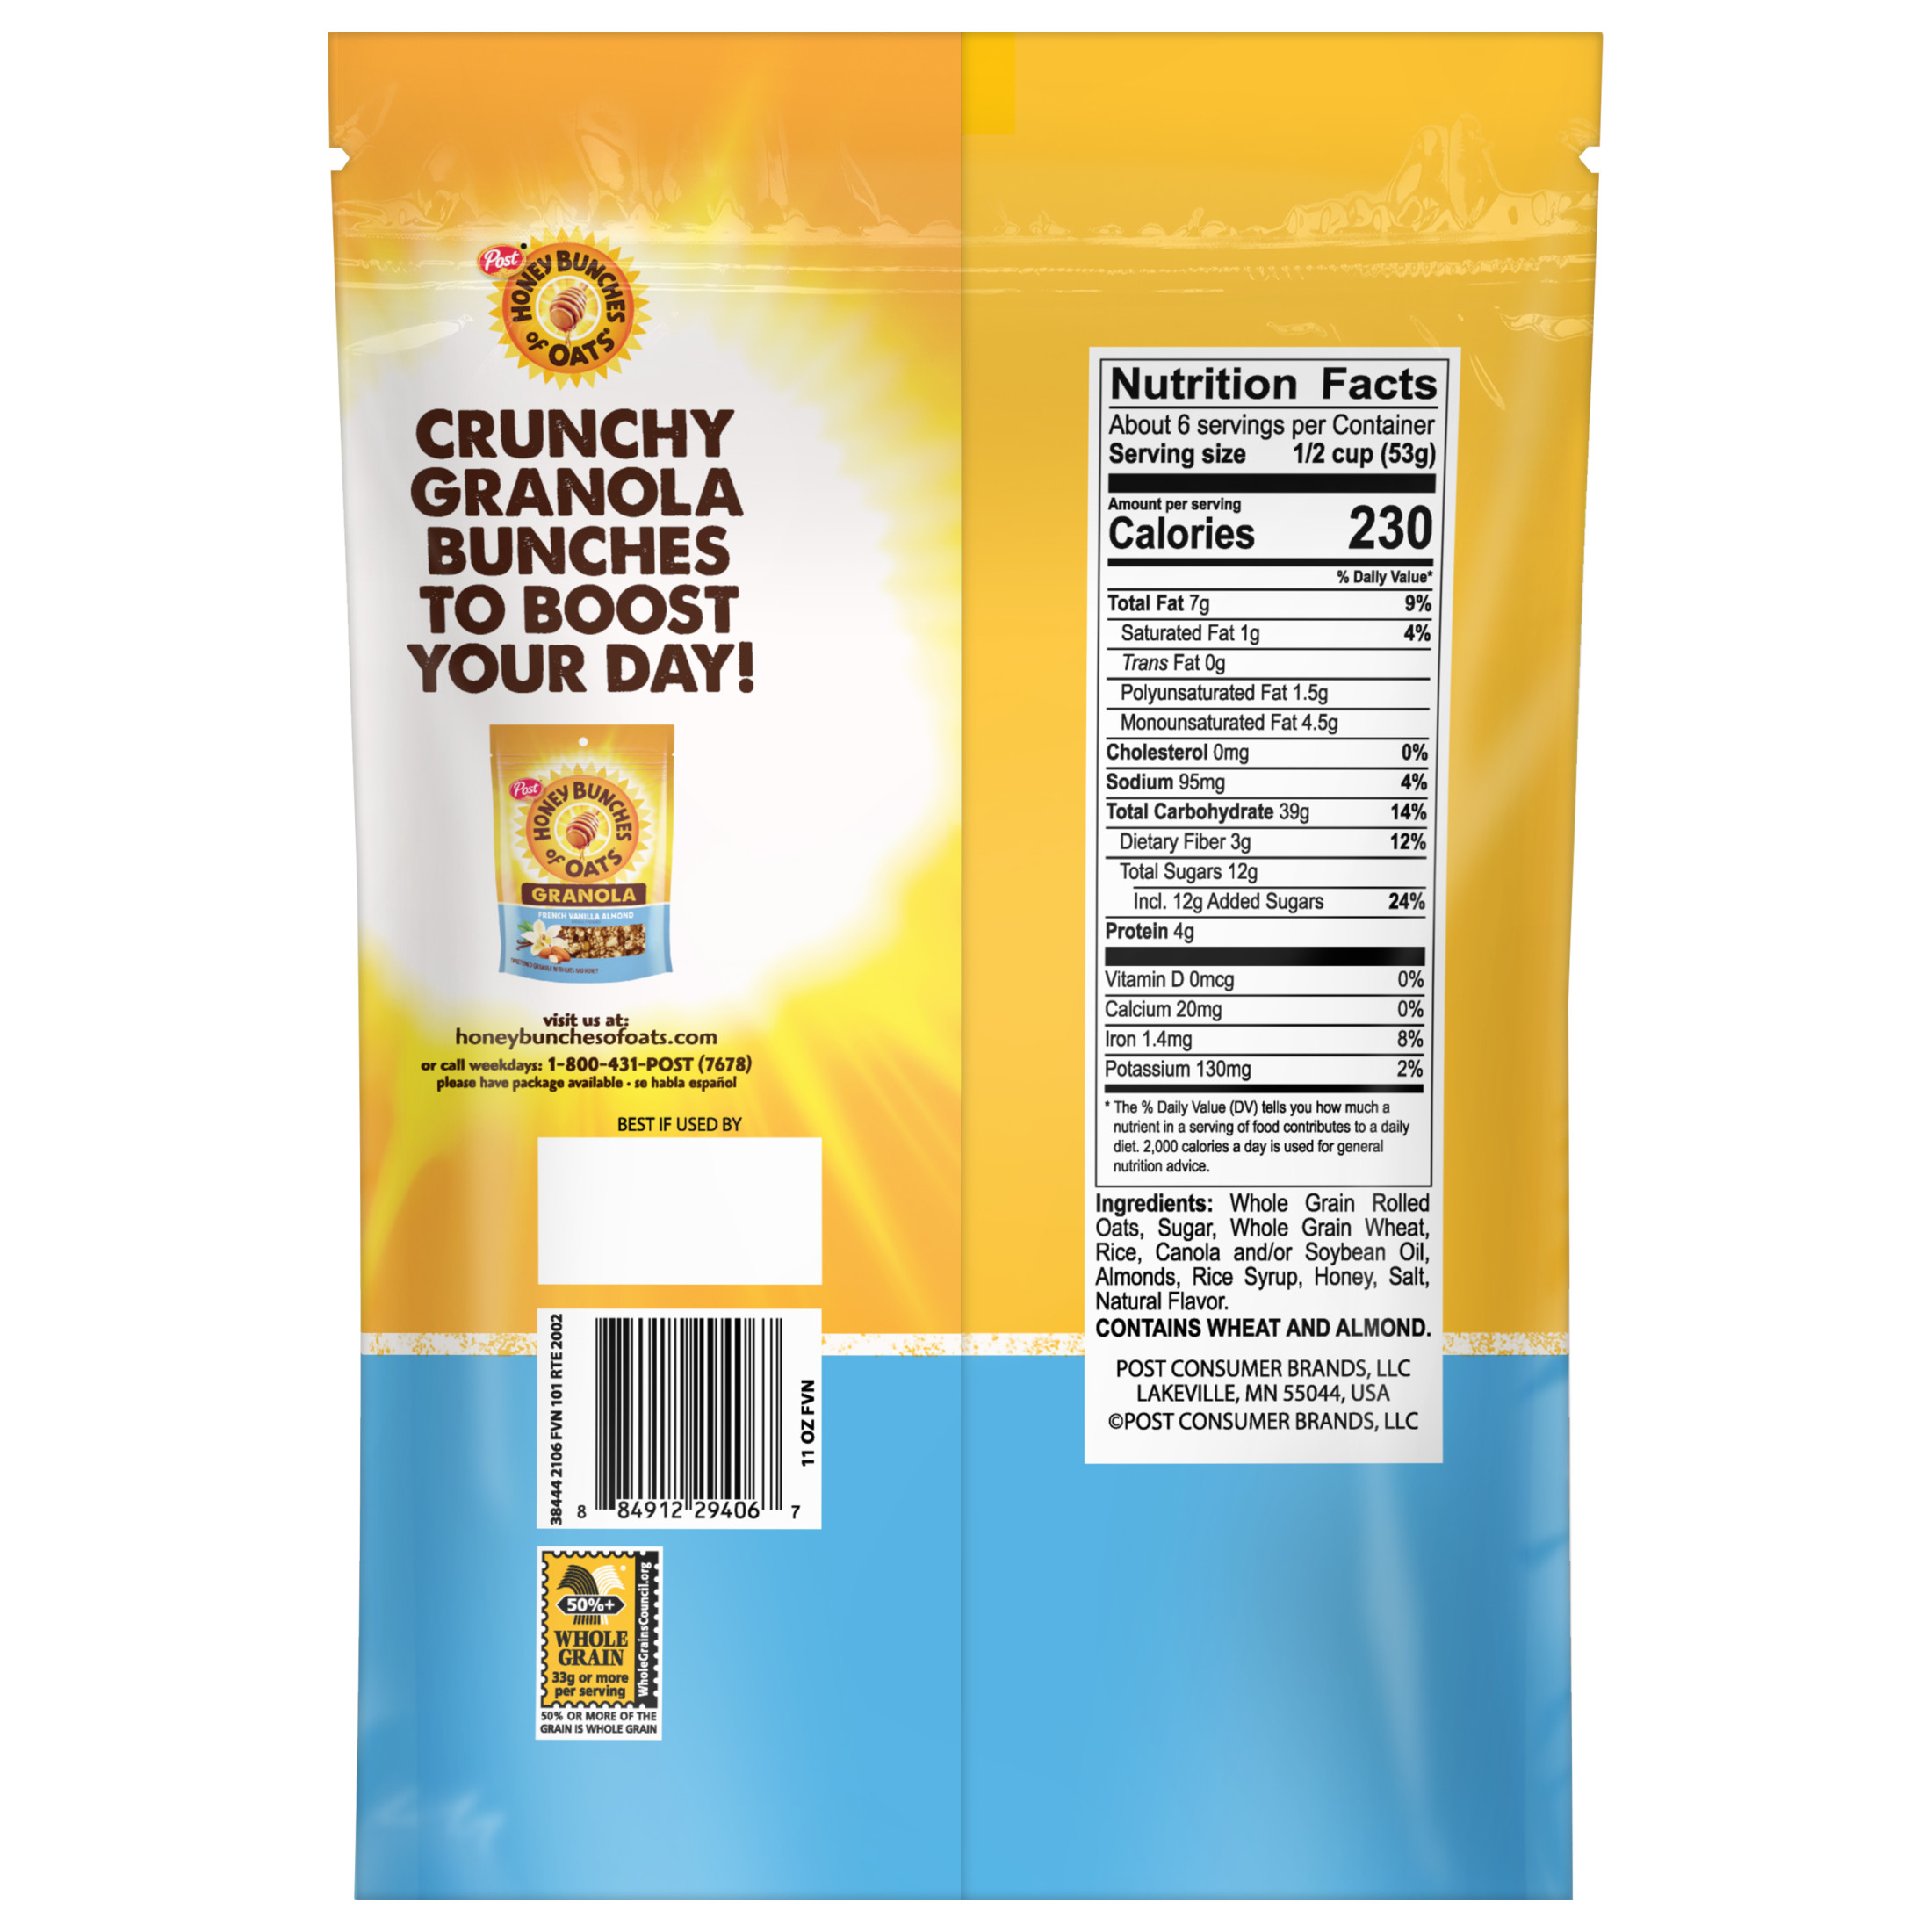 Post Honey Bunches of Oats French Vanilla Almond Granola Cereal, Vanilla Granola with Crushed Almonds, 11 oz Granola Bag - image 4 of 5